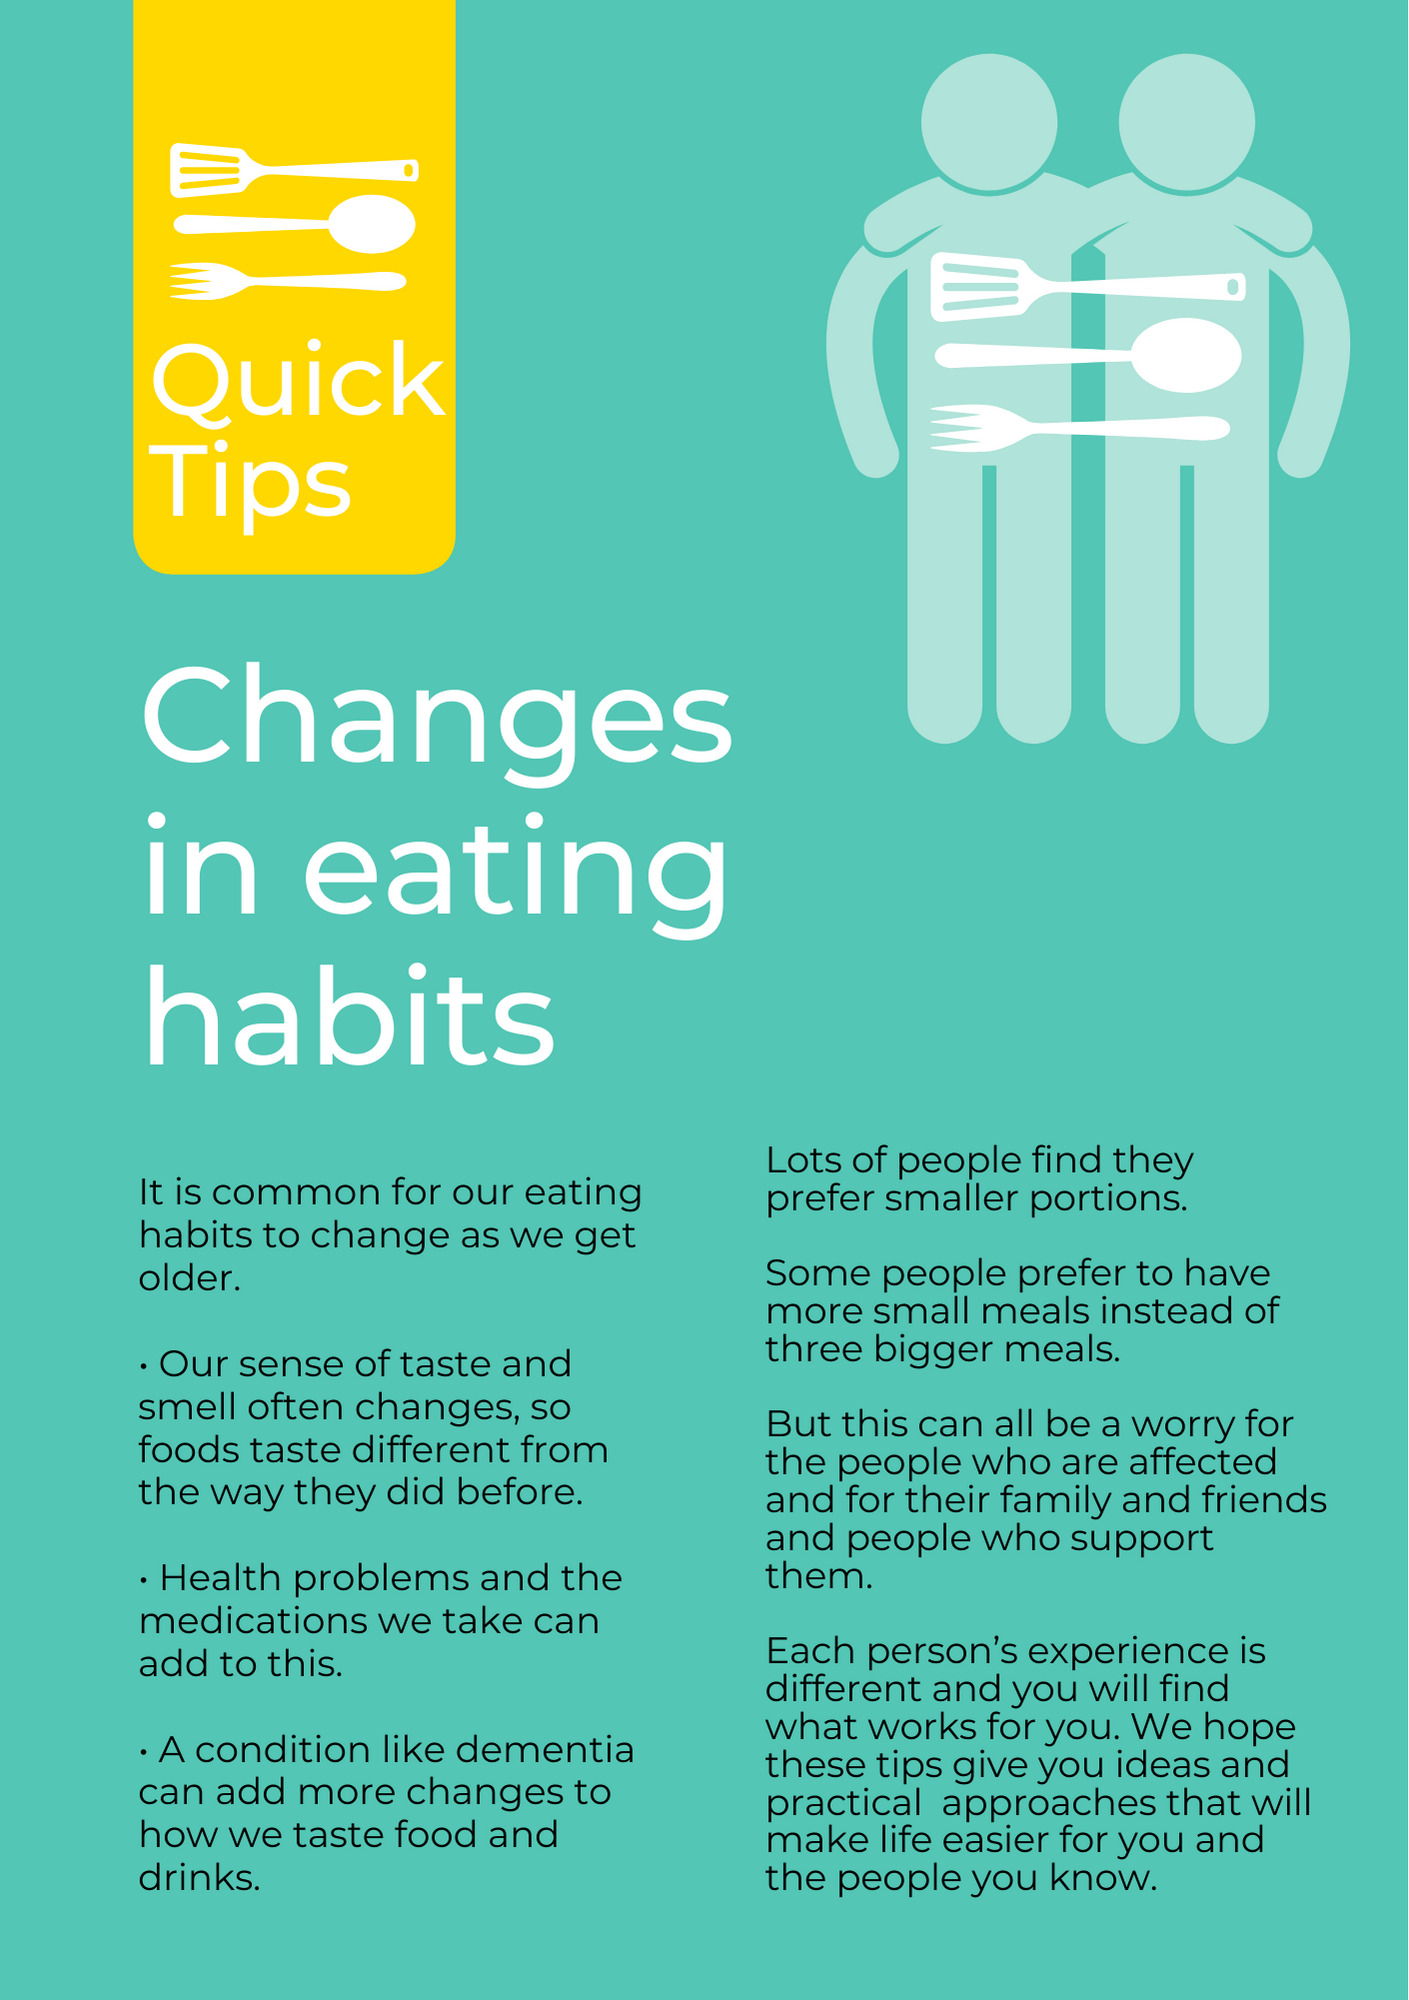 Changes in eating habits quick tips